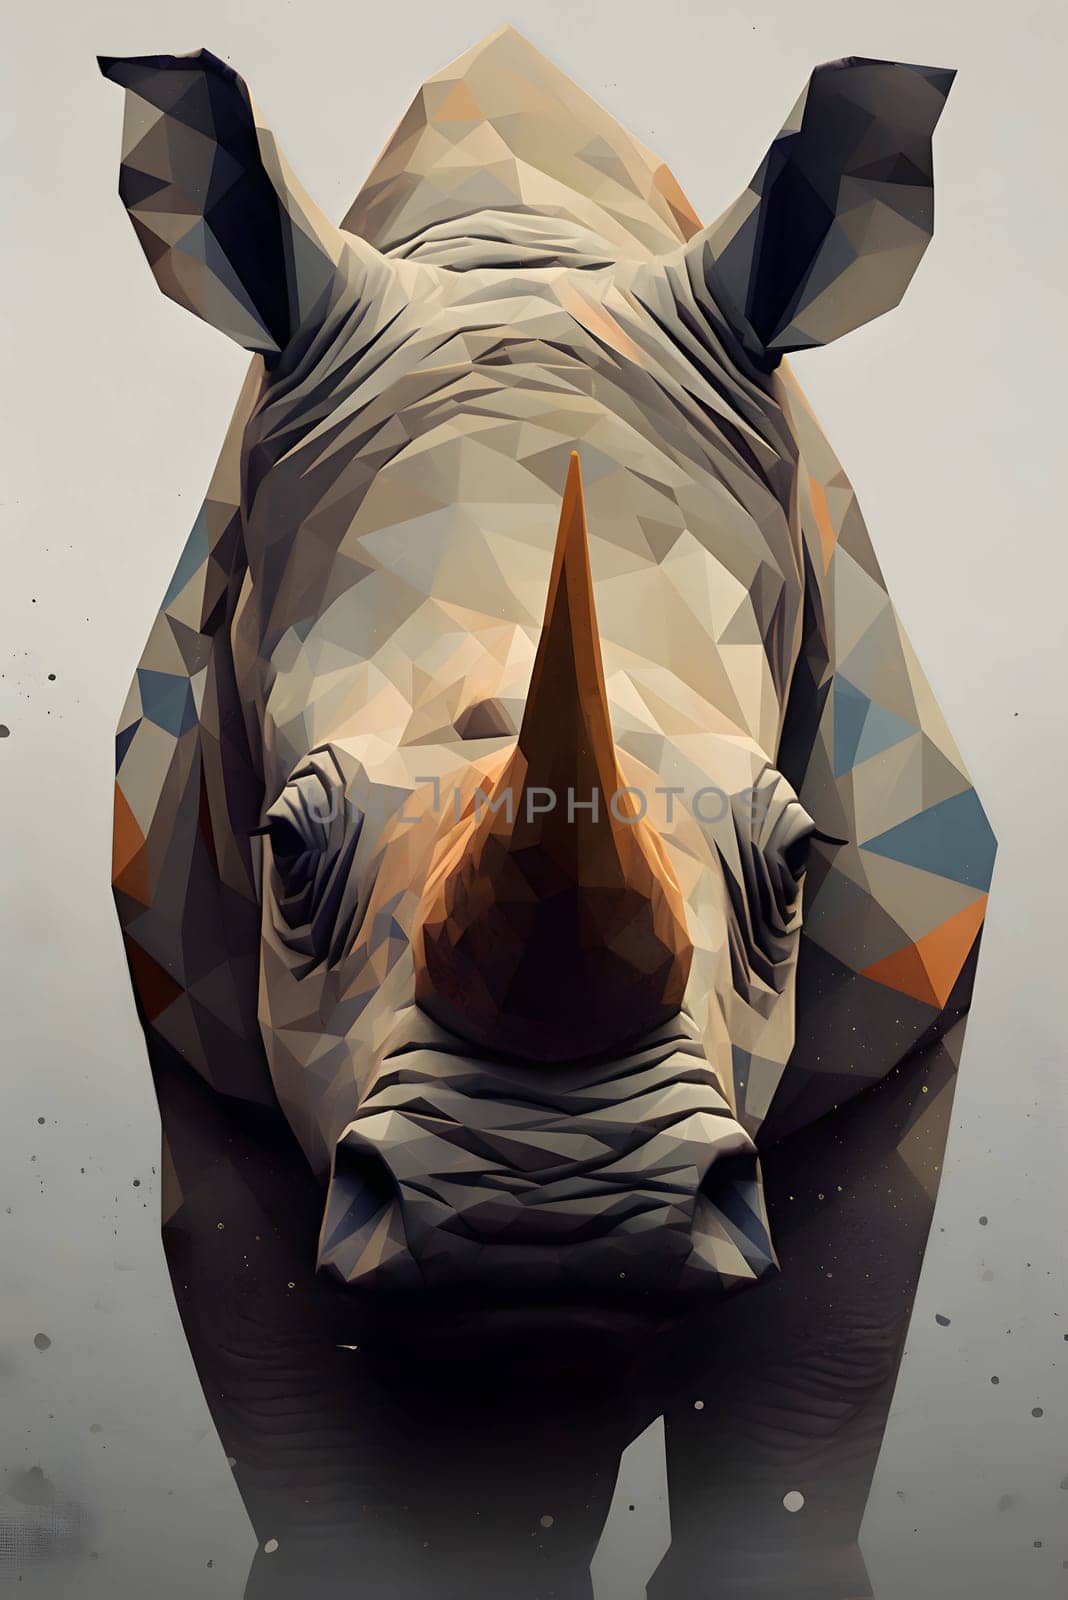 Abstract illustration: Low poly rhinoceros in low poly style. Vector illustration